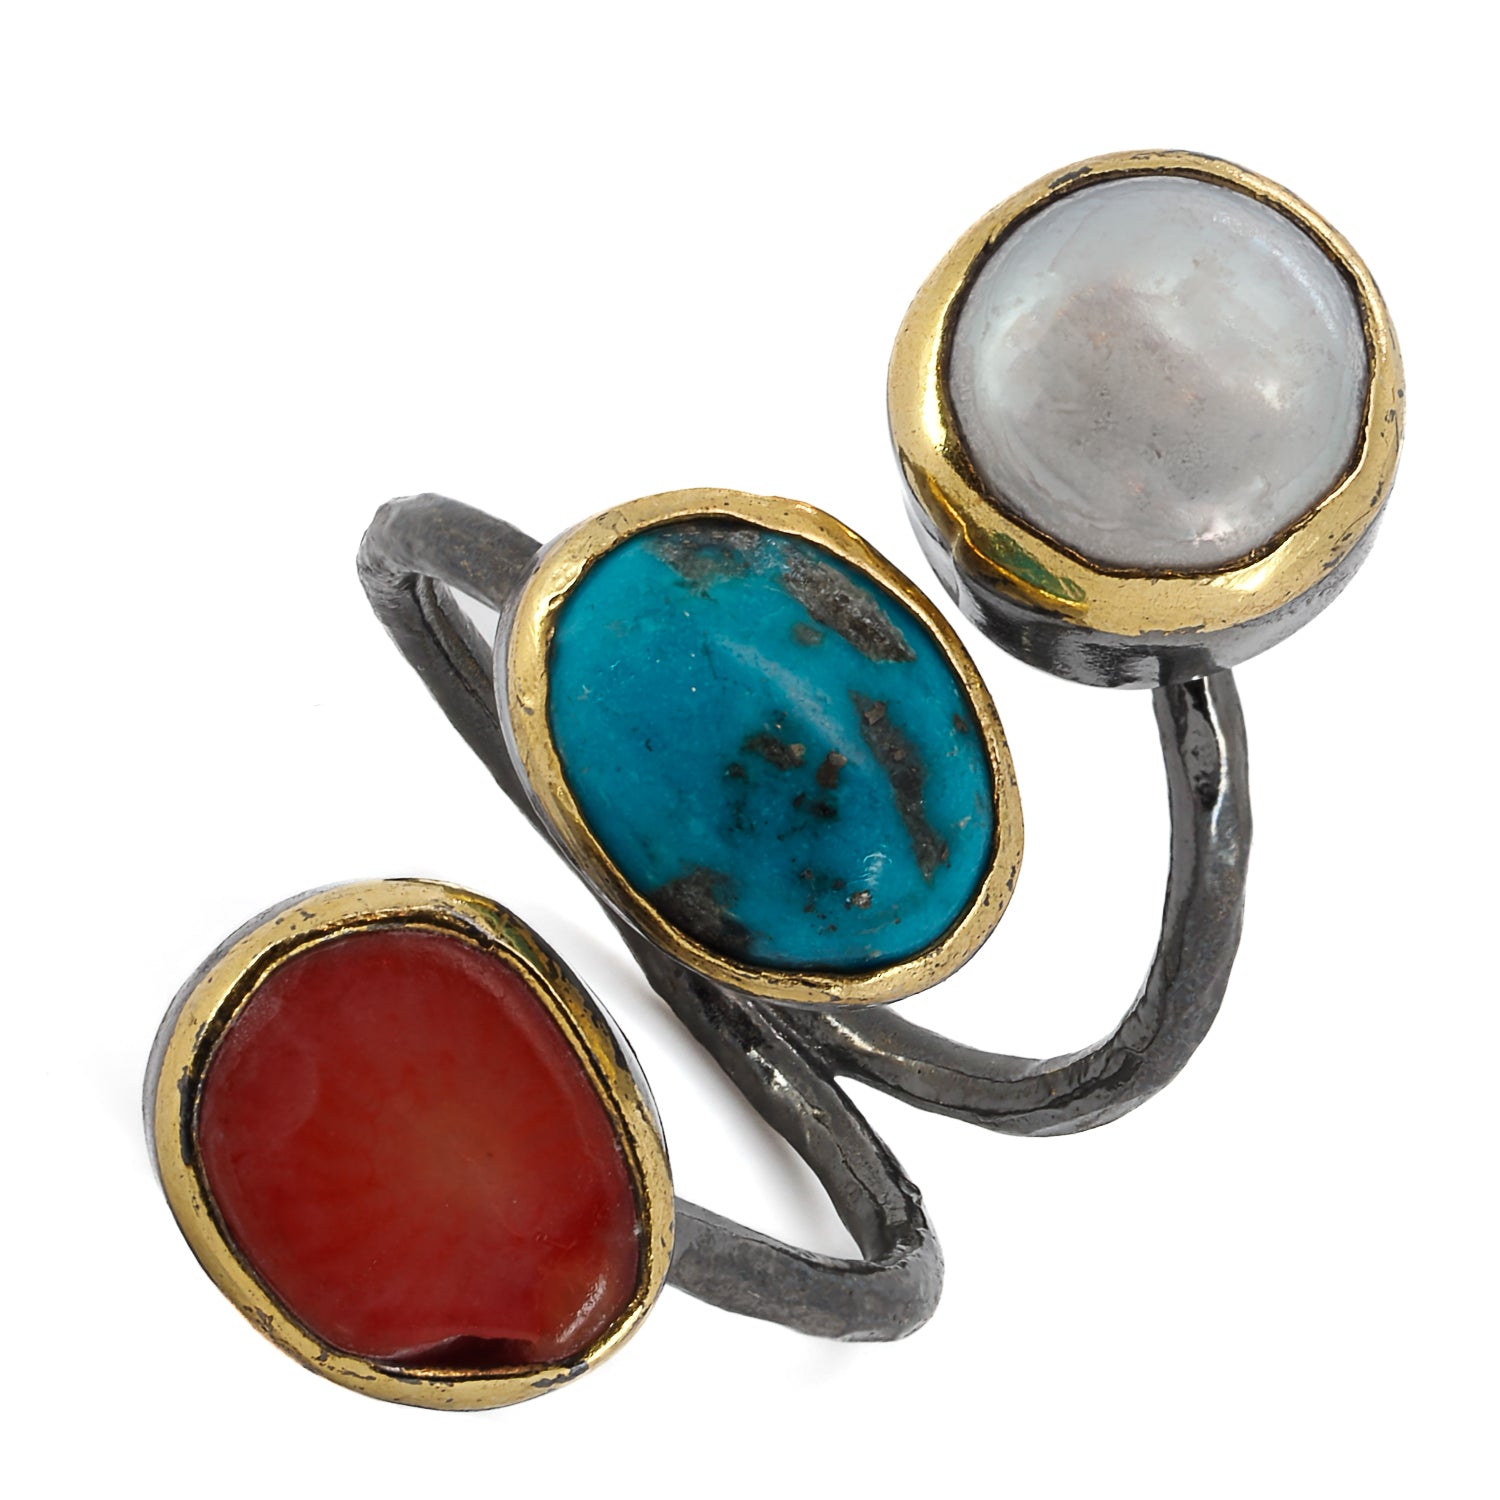 Admire the beauty of the Coral, Turquoise, and Pearl gemstones in the ring.